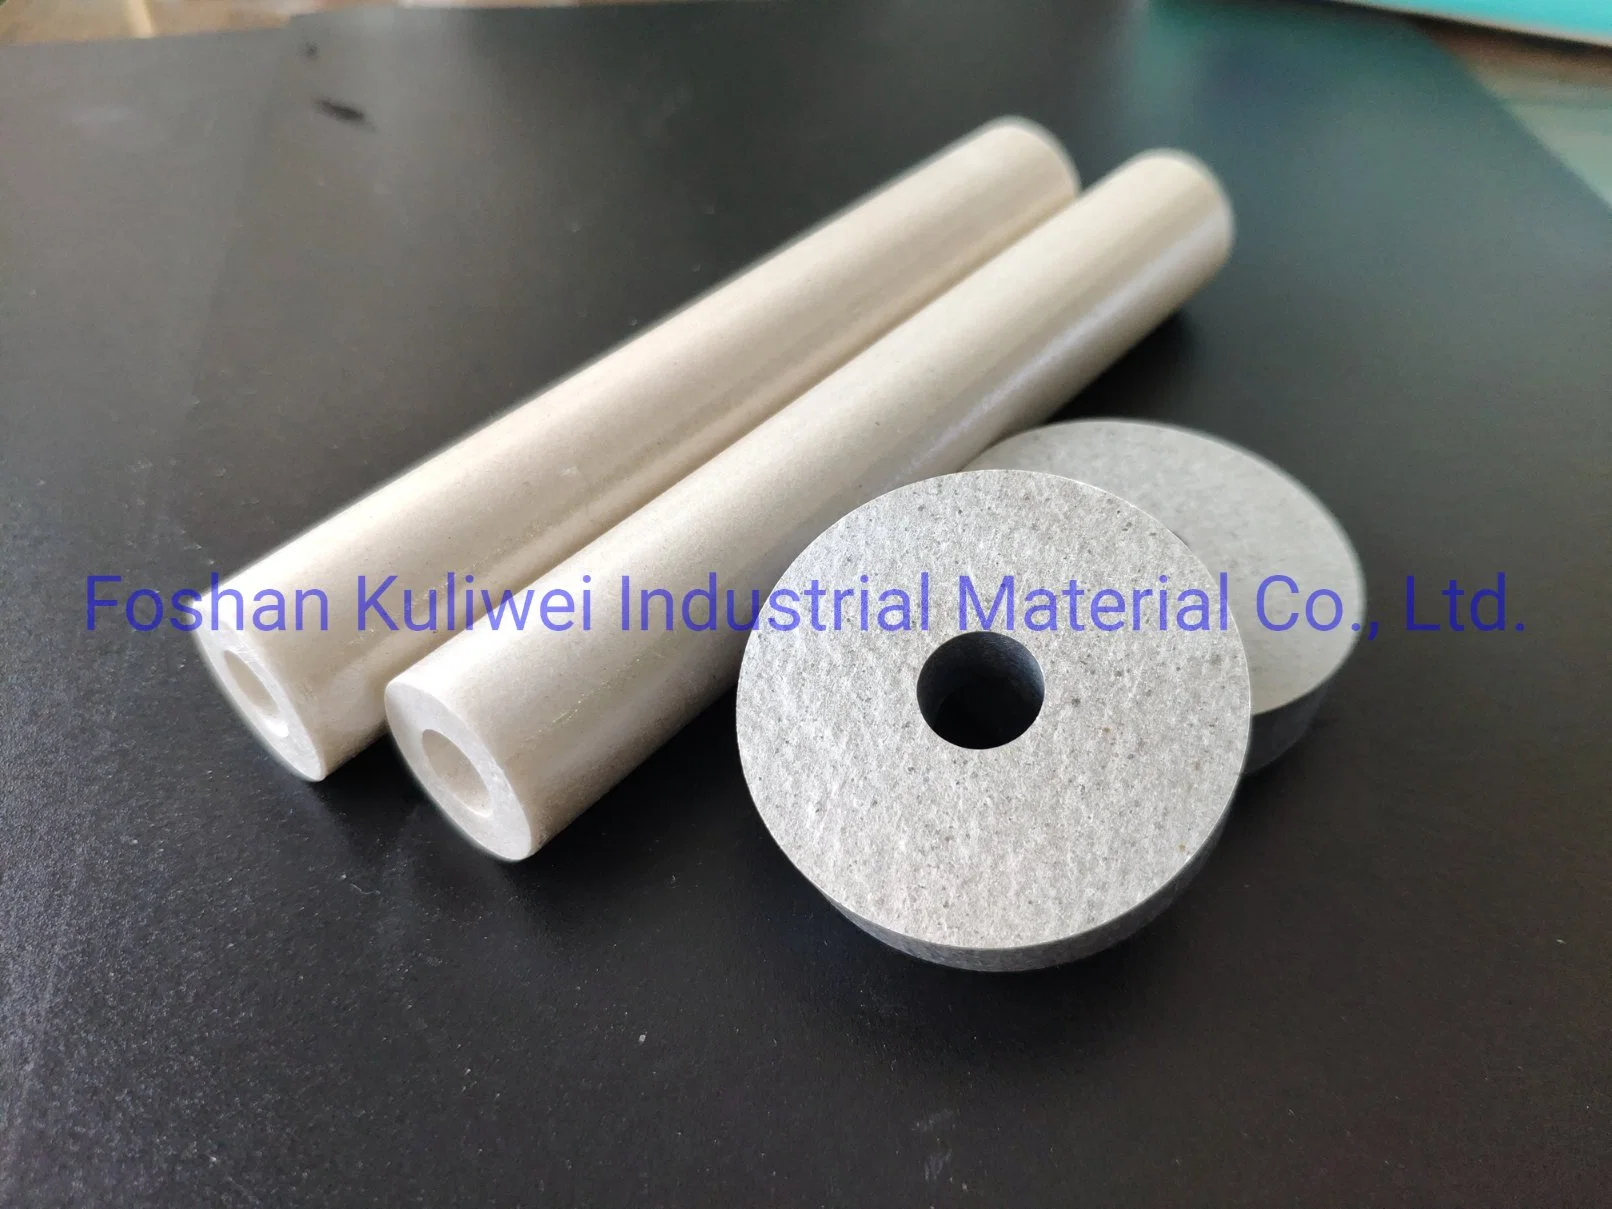 Export Quality Electric Insulation 0.1mm Heat Resistant Phlogopite Mica Sheet